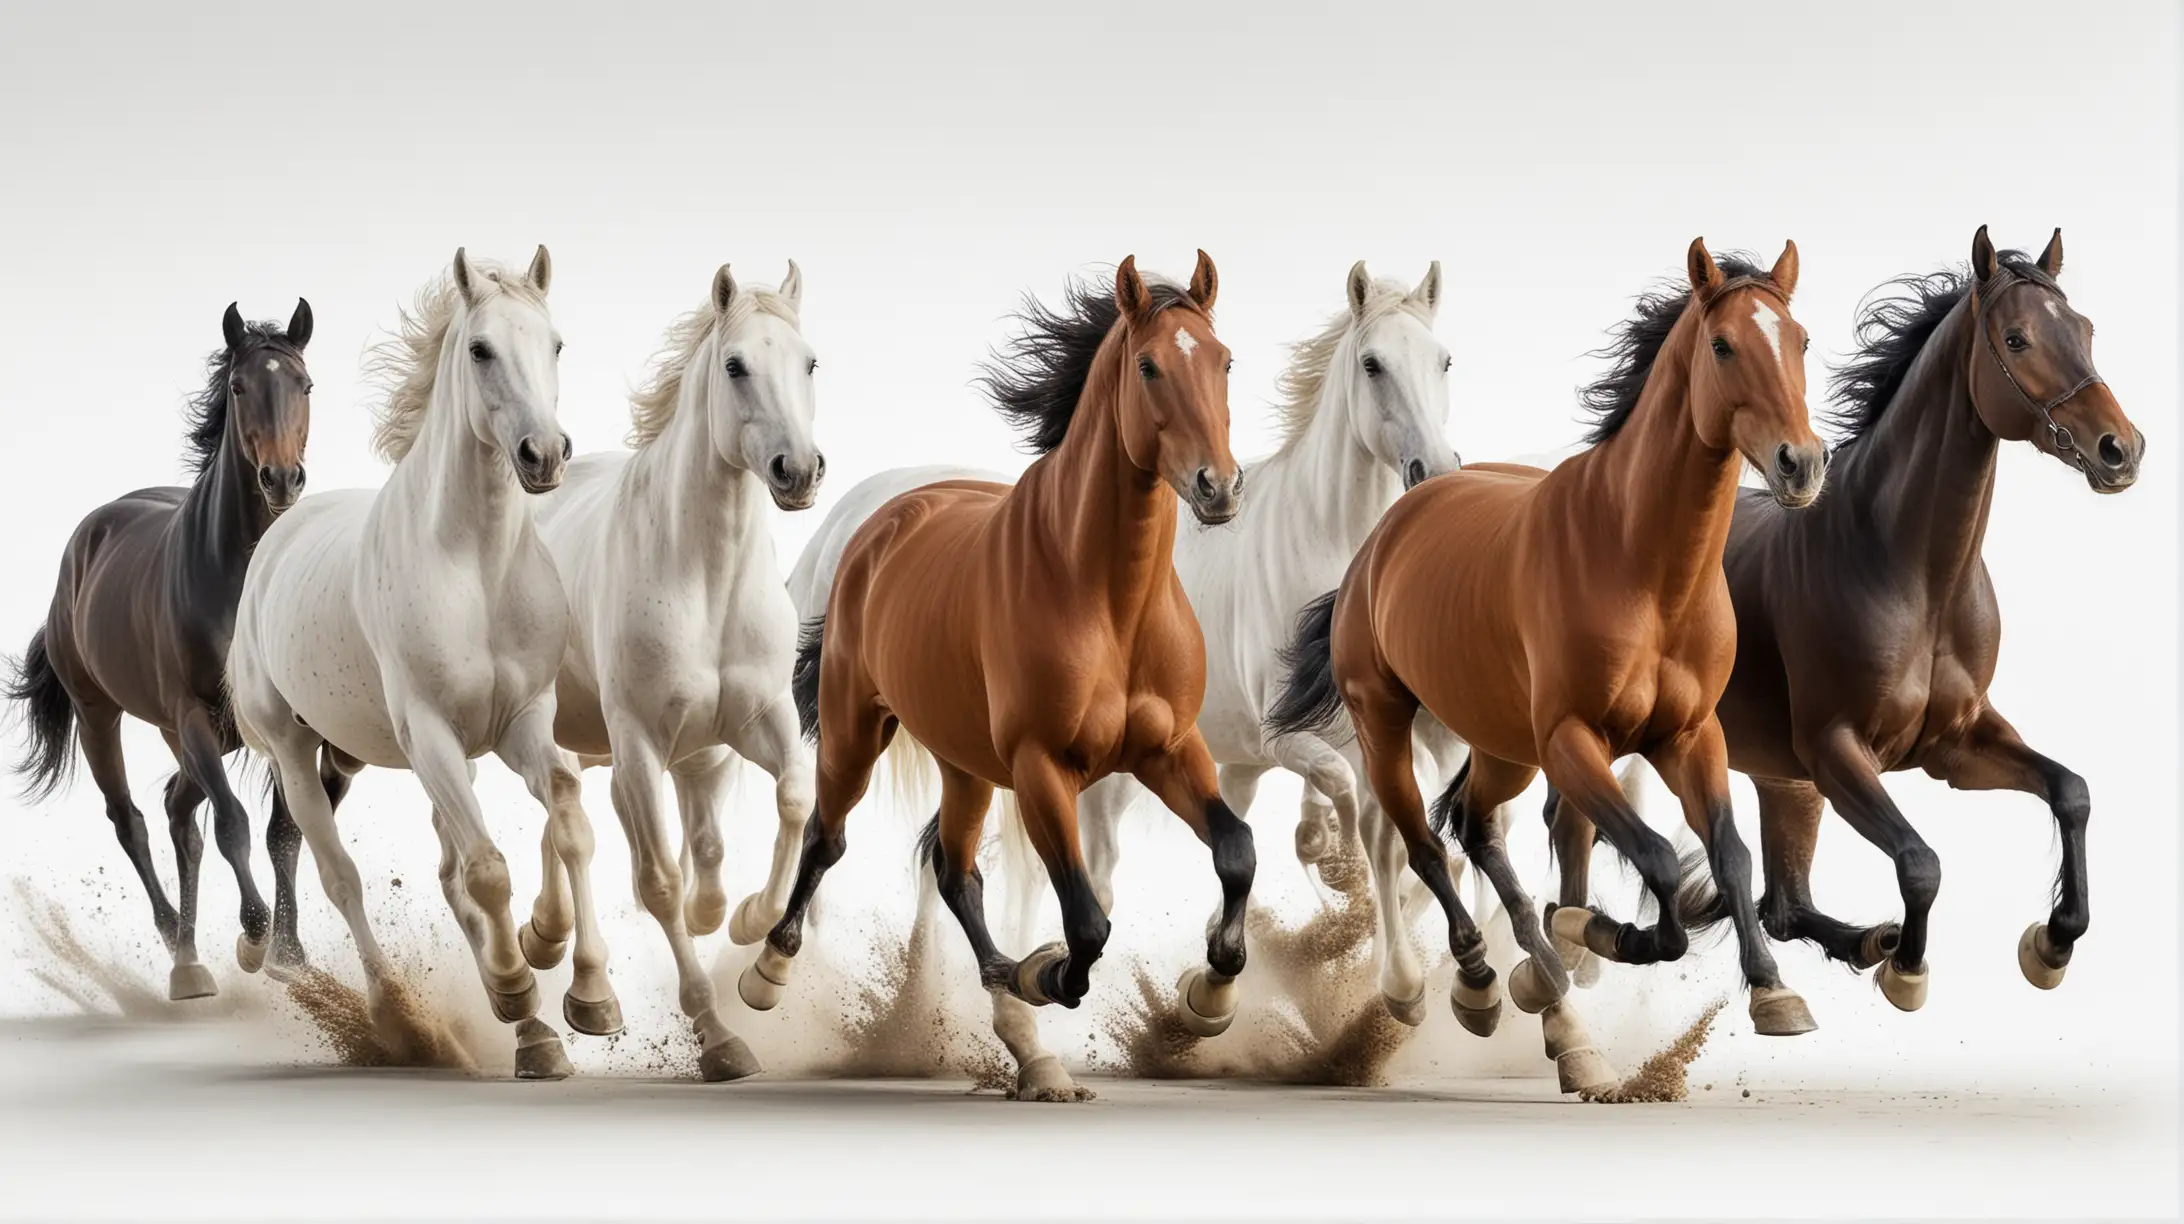 Group of Horses Galloping on White Background